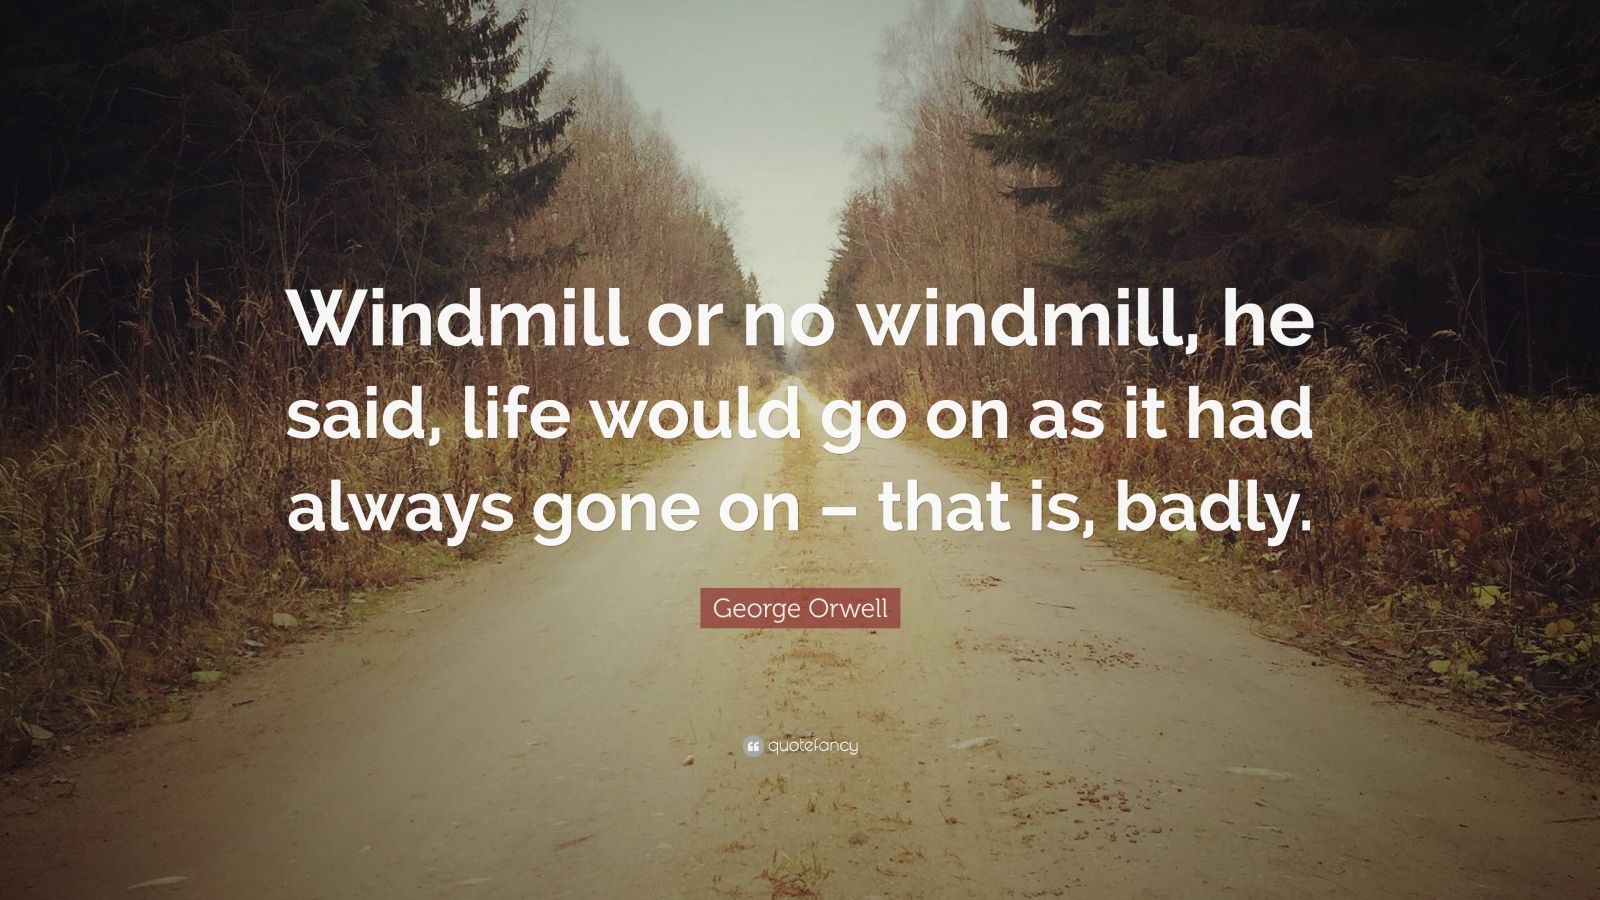 George Orwell Quote Windmill Or No Windmill He Said Life Would Go On As It Had Always Gone On That Is Badly